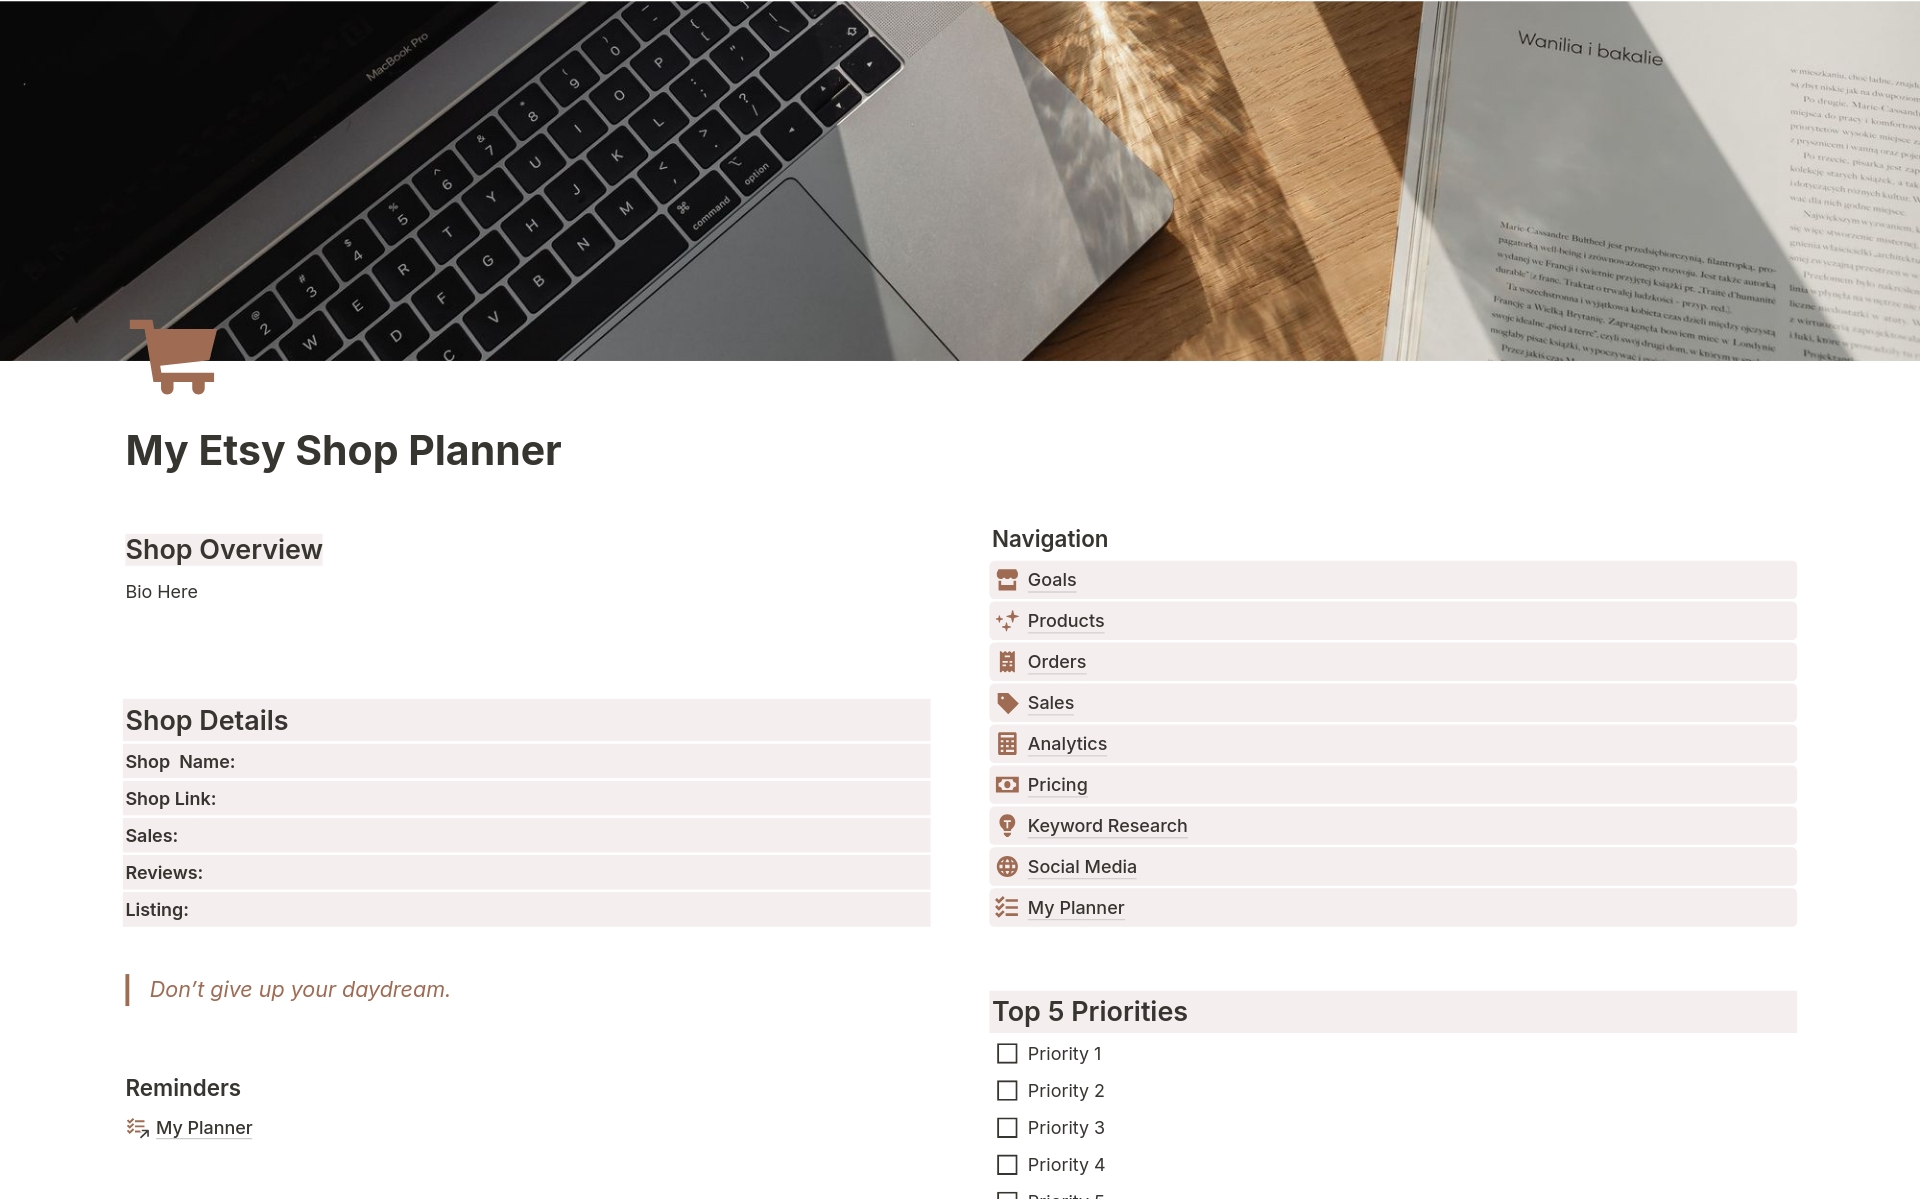 Maximize your Etsy shop efficiency with our Ultimate All-in-One Etsy Shop Planner Notion Template.